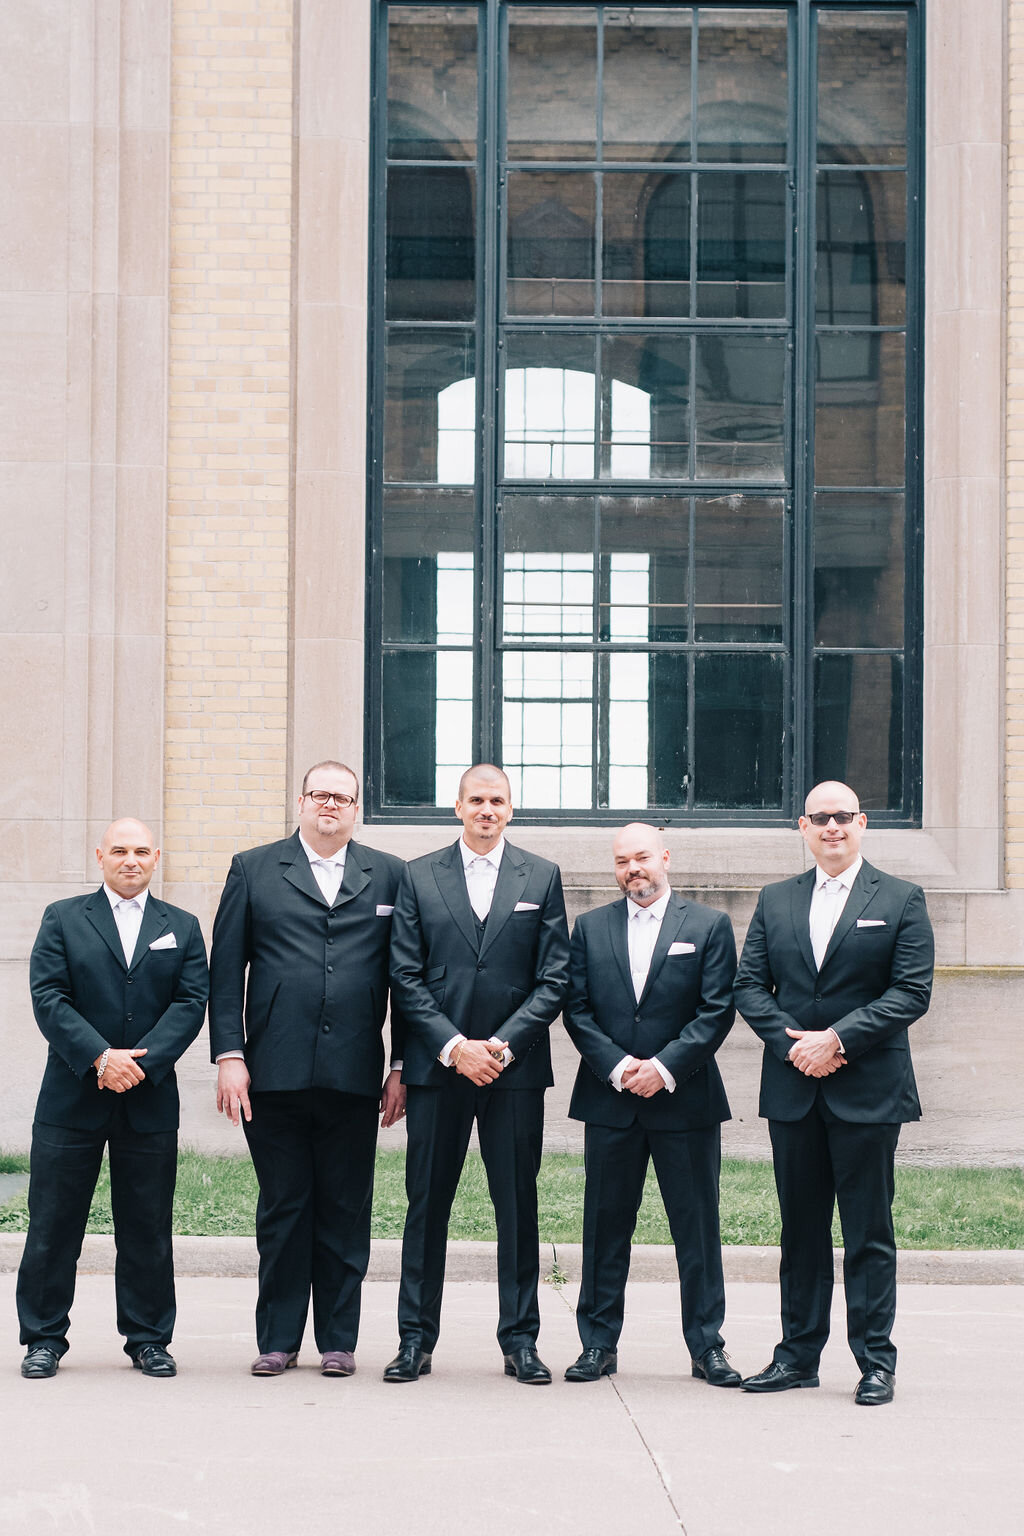 Toronto groom and his groomsmen at the Toronto bride and groom and their wedding party walk past the impressive buildings at the R.C. Harris Water Treatment Plant on groom's wedding day